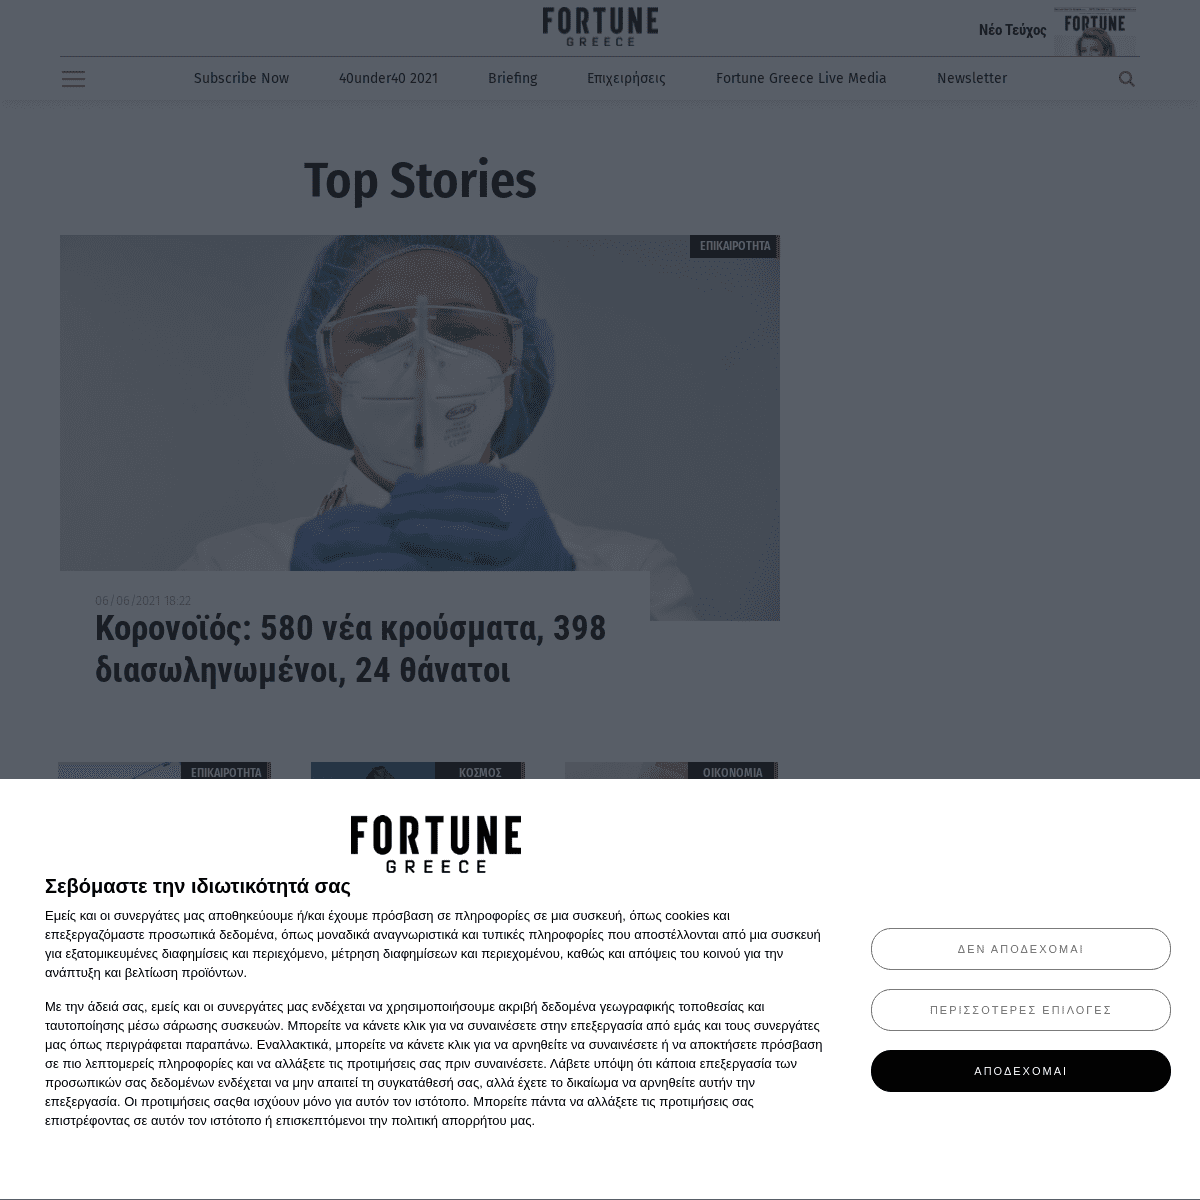 A complete backup of https://fortunegreece.com